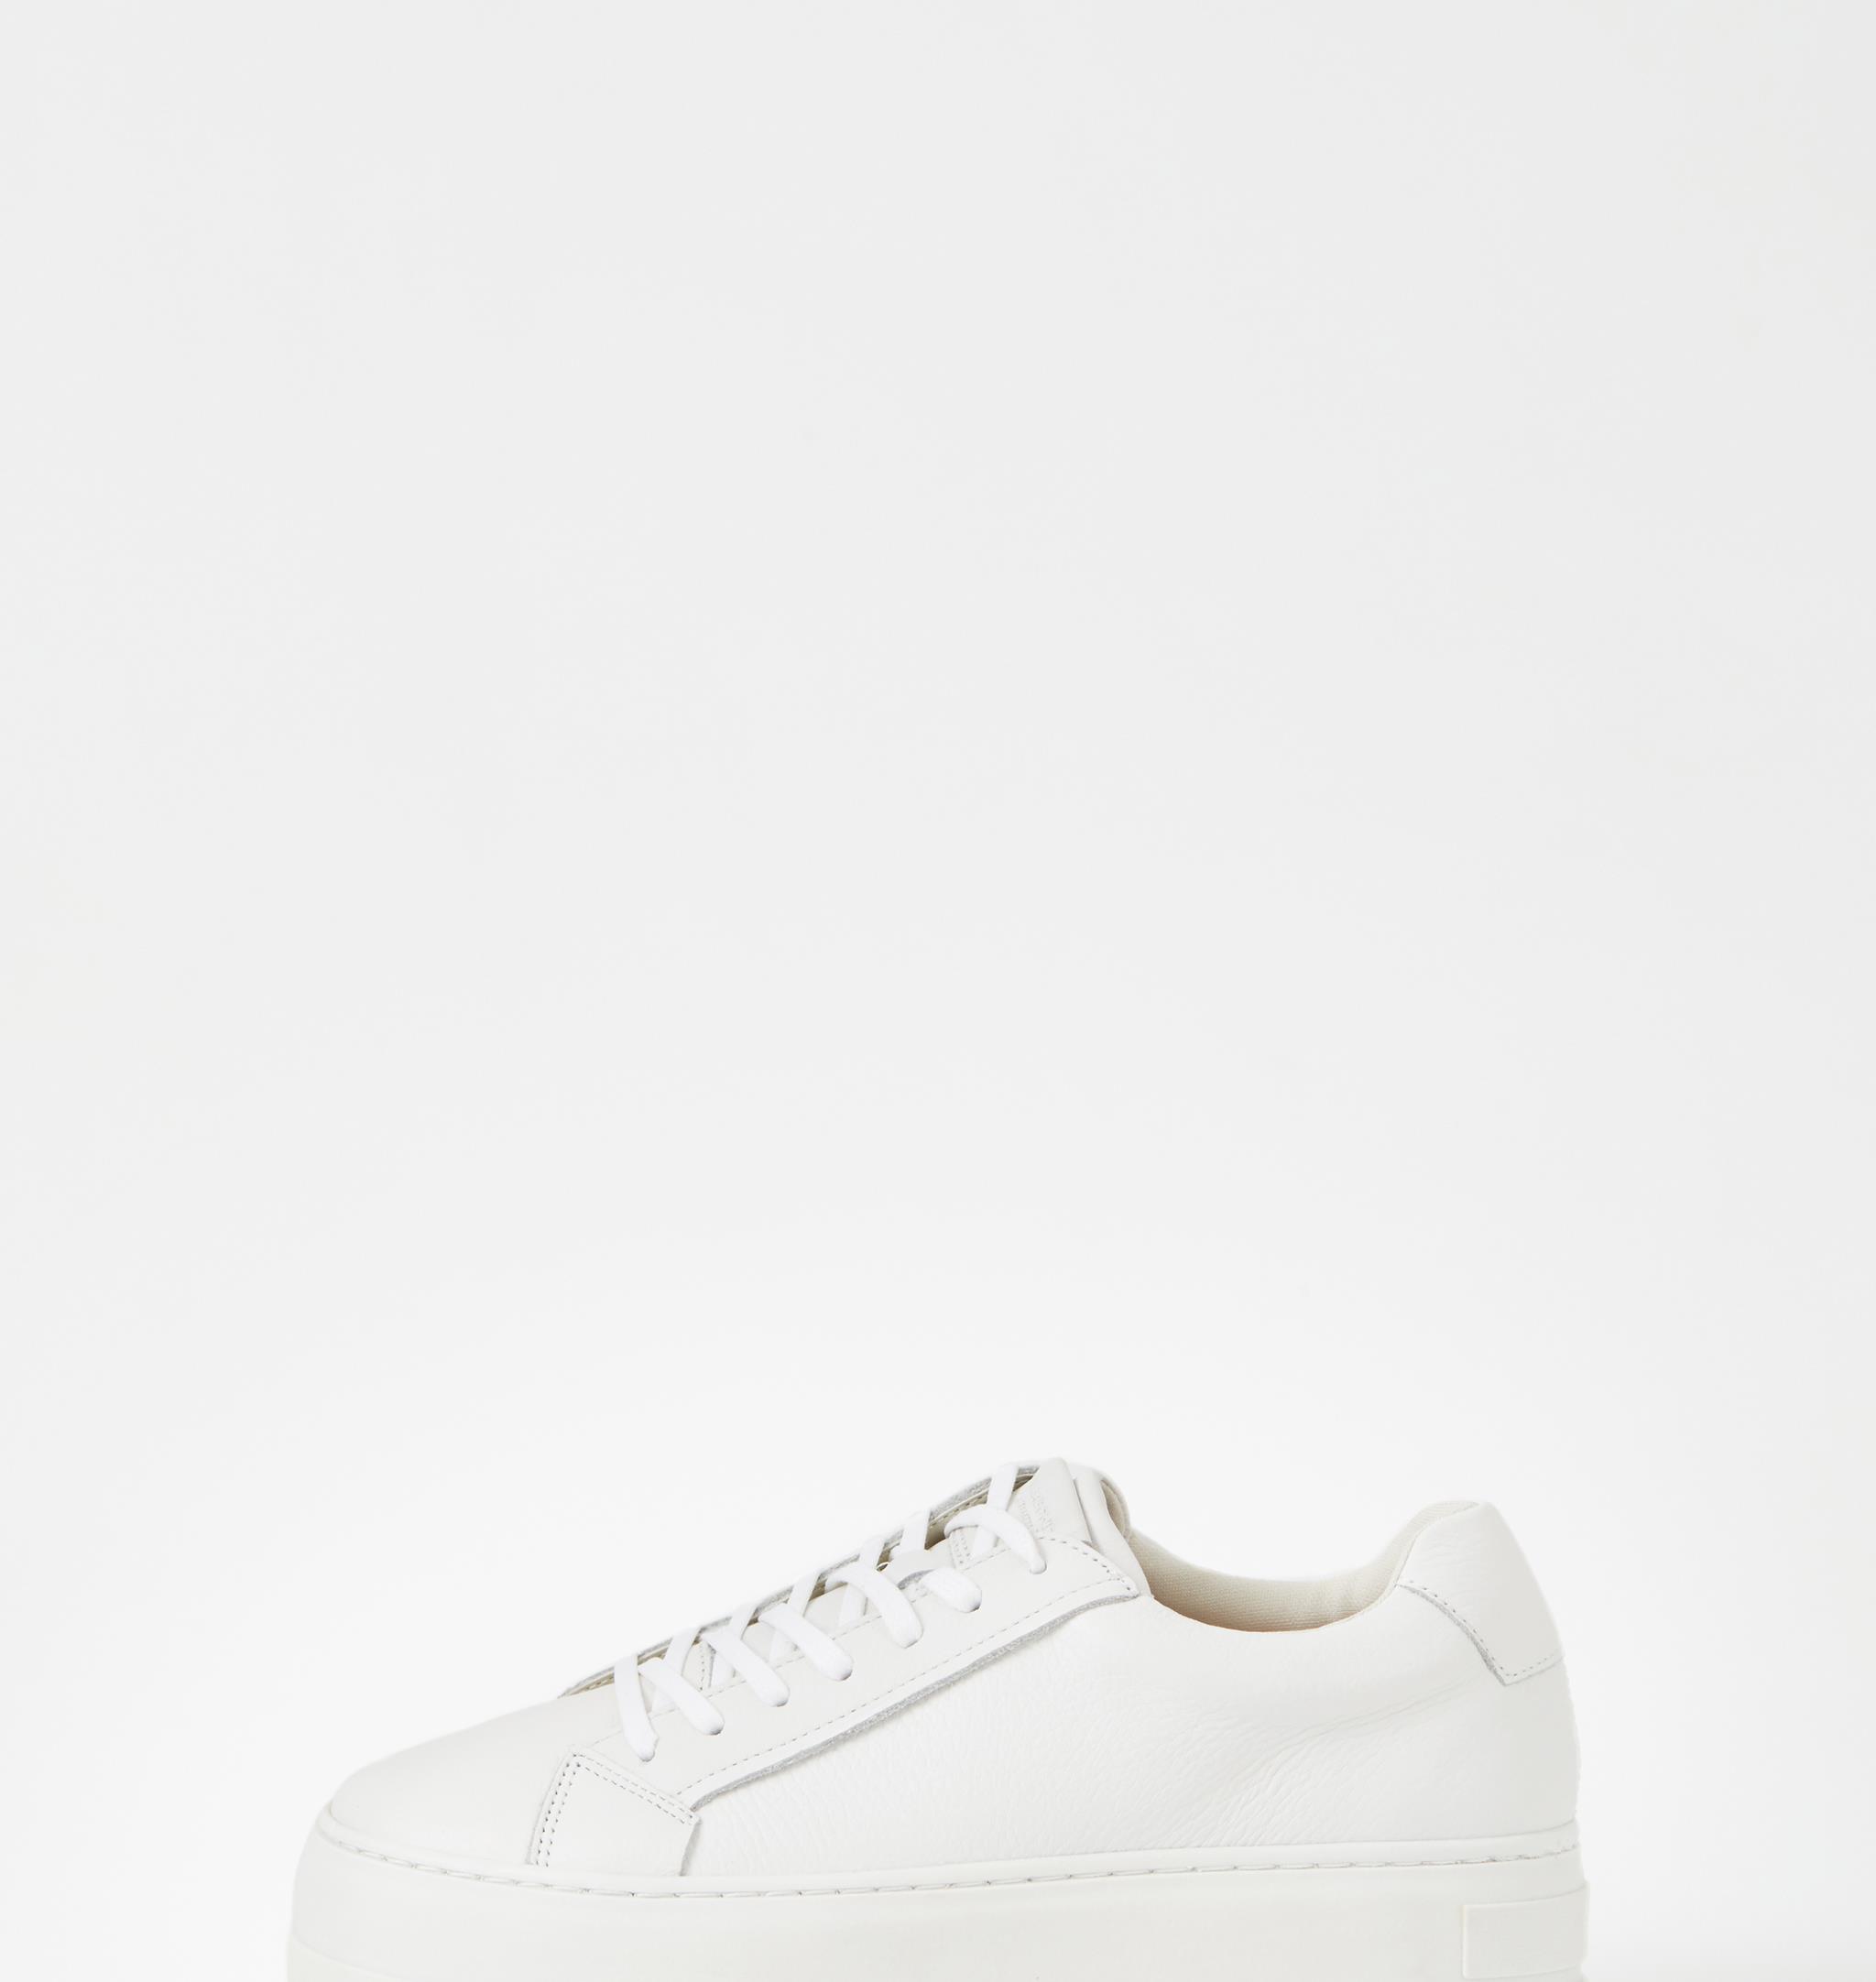 Permanent Excel Indlejre Judy - White Sneakers Woman | Vagabond